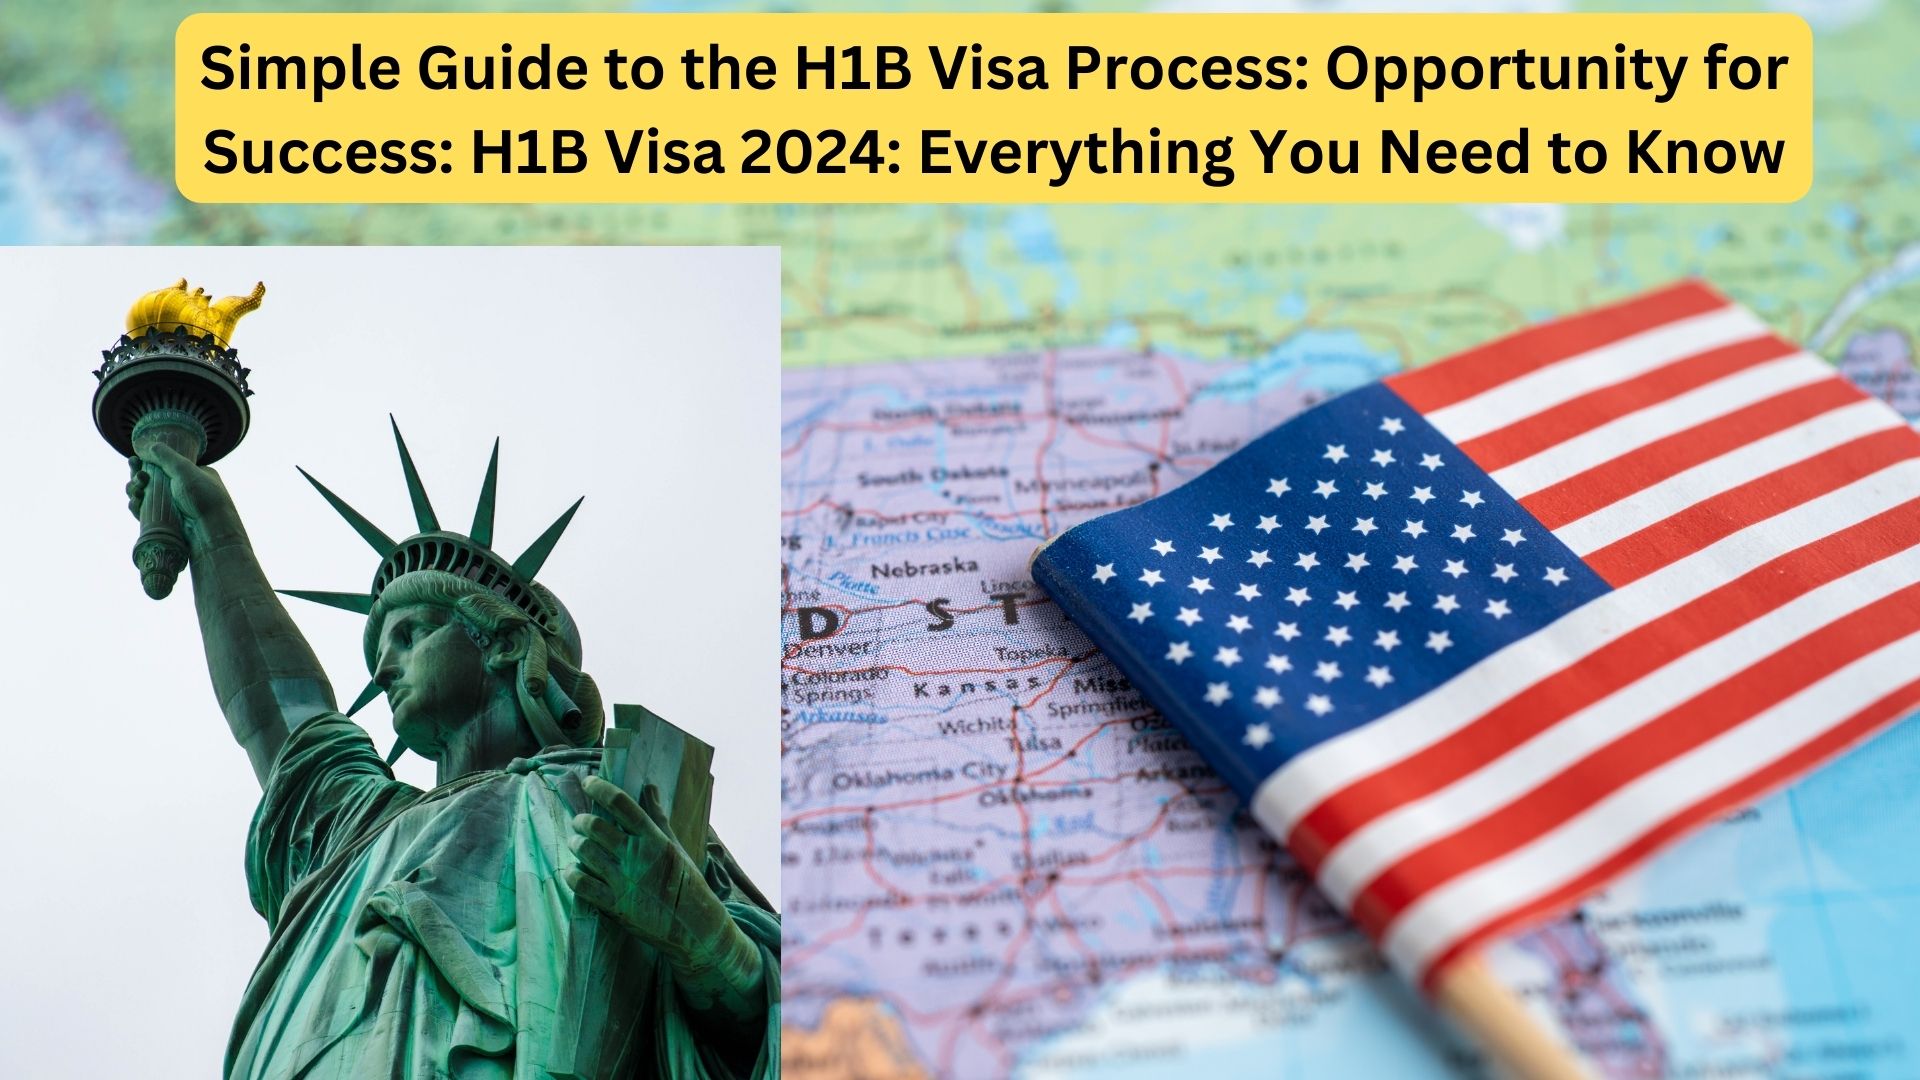 Simple Guide to the H1B Visa Process Opportunity for Success H1B Visa